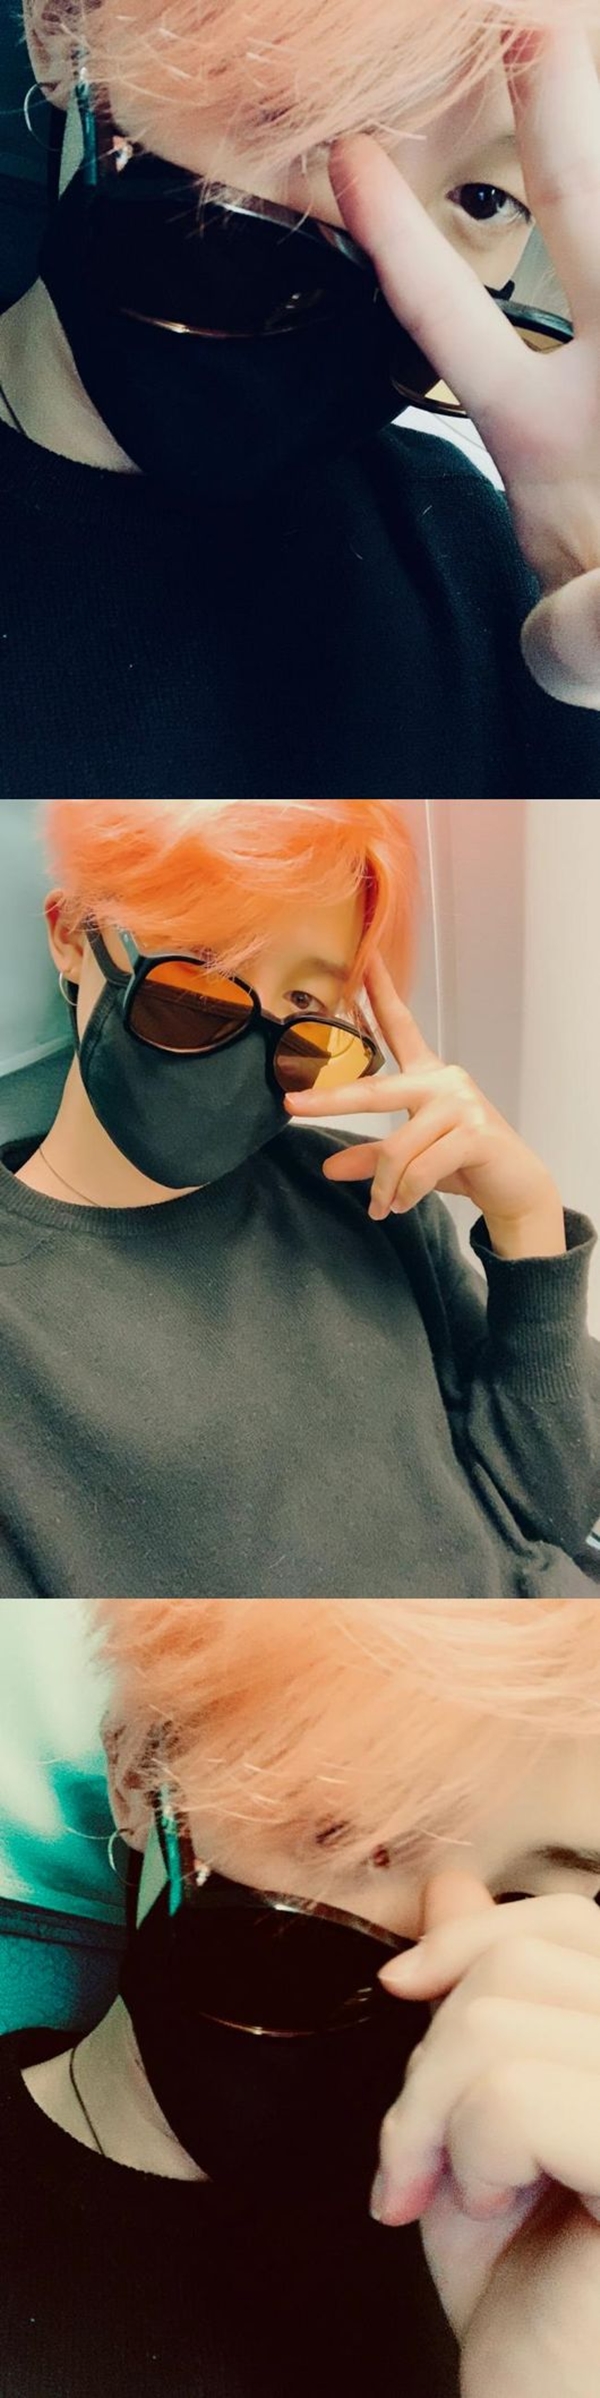 Group BTS member Jimin has released a photo of United States of America arrival certification.Jimin posted photos on the official SNS of BTS on the afternoon of the 30th, along with We arrived well and announcing the arrival of United States of America.Jimin posted a night view taken on the plane, a mask and sunglasses, and a picture taken in a comfortable manner.BTS left for United States of America on the 29th to attend the 2019 Billboard Music Awards.They will take to the stage as a performer at the awards ceremony at the MGM Grand Garden Arena in Las Vegas on May 1 (local time).At the ceremony, BTS was nominated for the Top Social Artist and Top Duo/Group category.